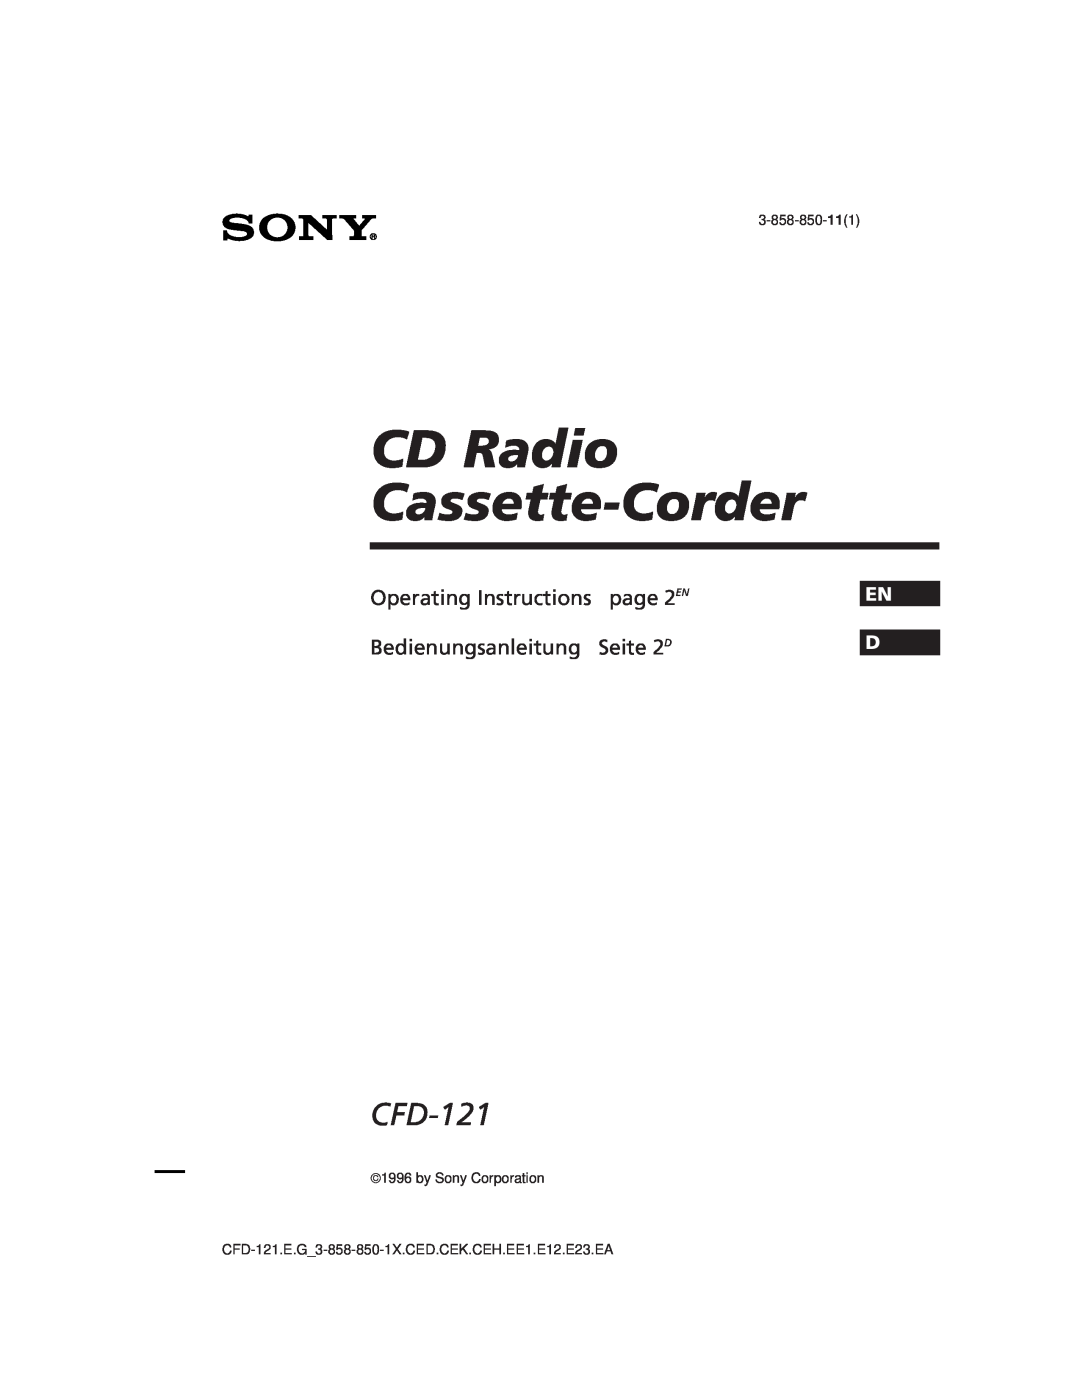 Sony CFD-121 manual CD Radio Cassette-Corder, Operating Instructions, 3-858-850-511, ã1996 by Sony Corporation 